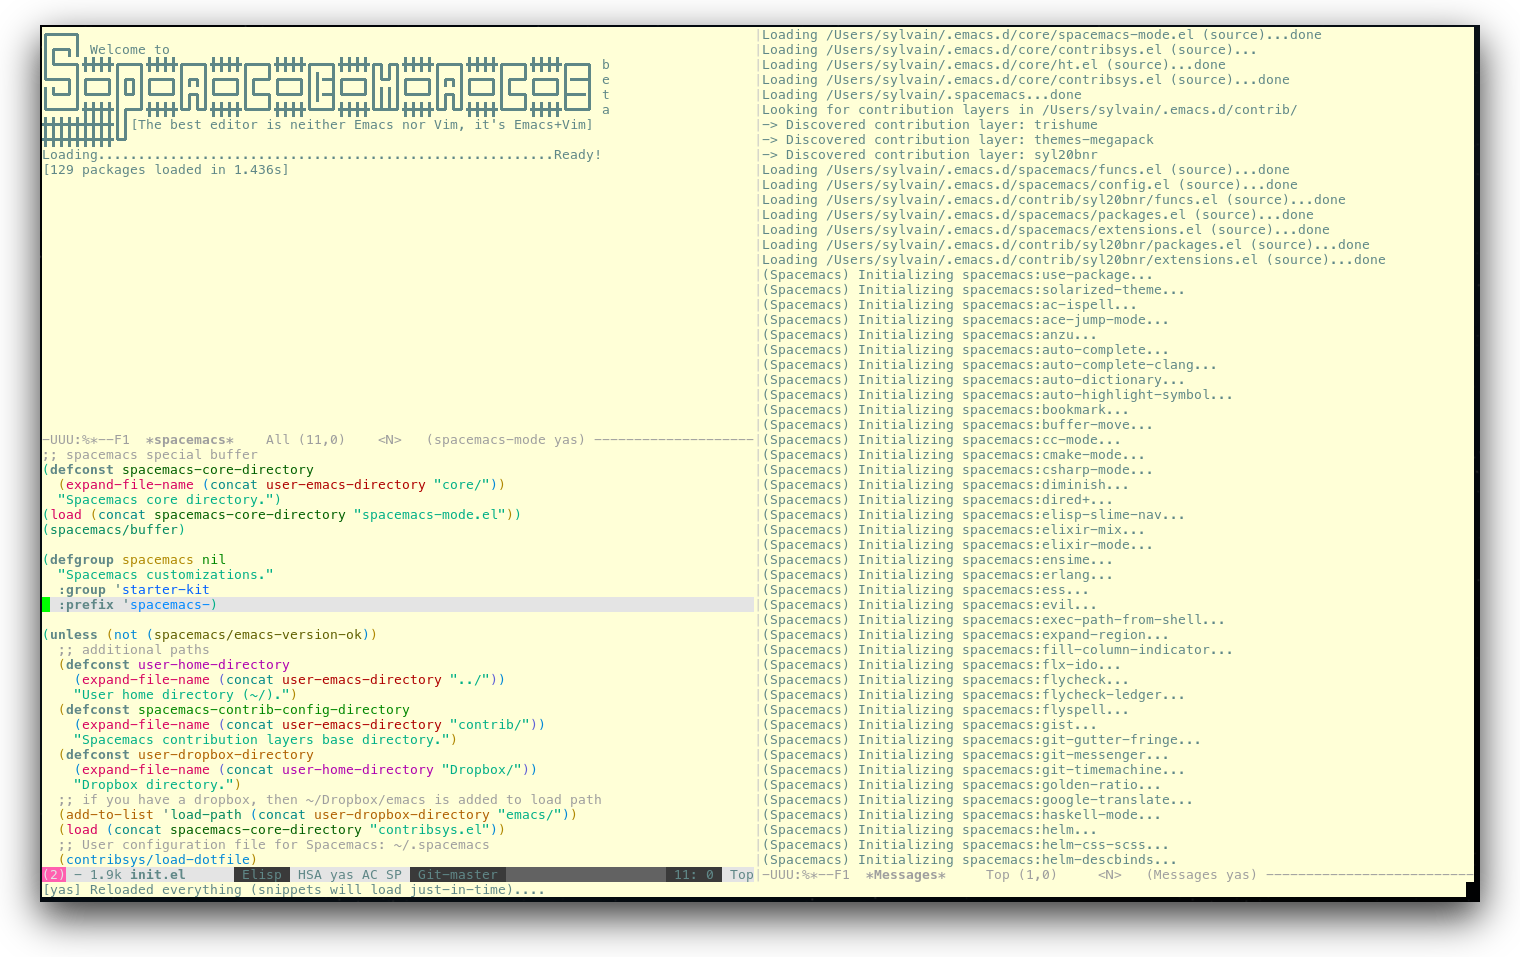 /TakeV/spacemacs/media/commit/b2628fb6b787fcbe578a8f8ce1d89644857d722a/doc/img/spacemacs-urxvt.png